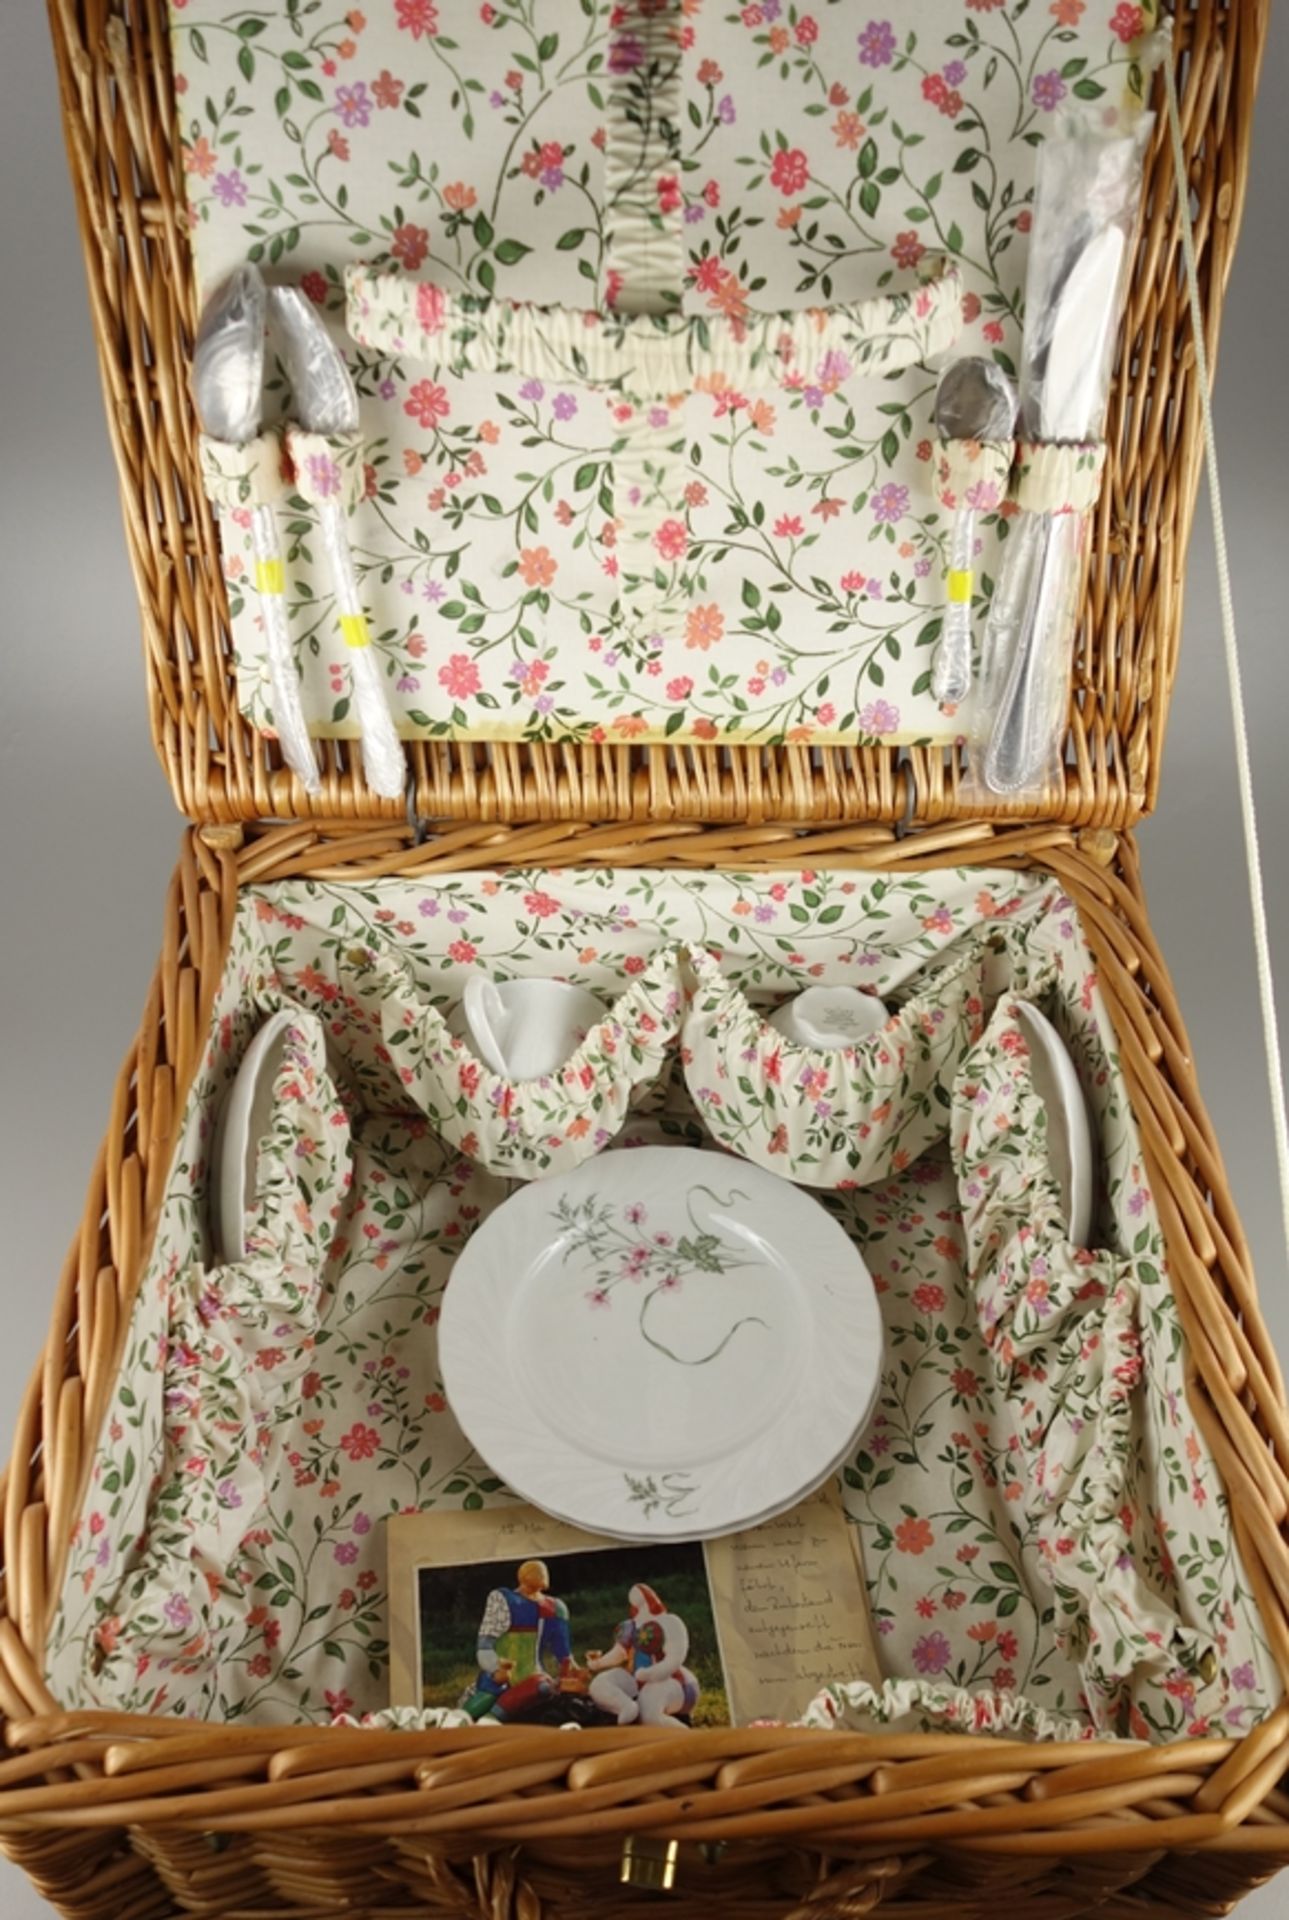 Picnic case, equipped with china and cutlery for 2 pers. - Image 2 of 2